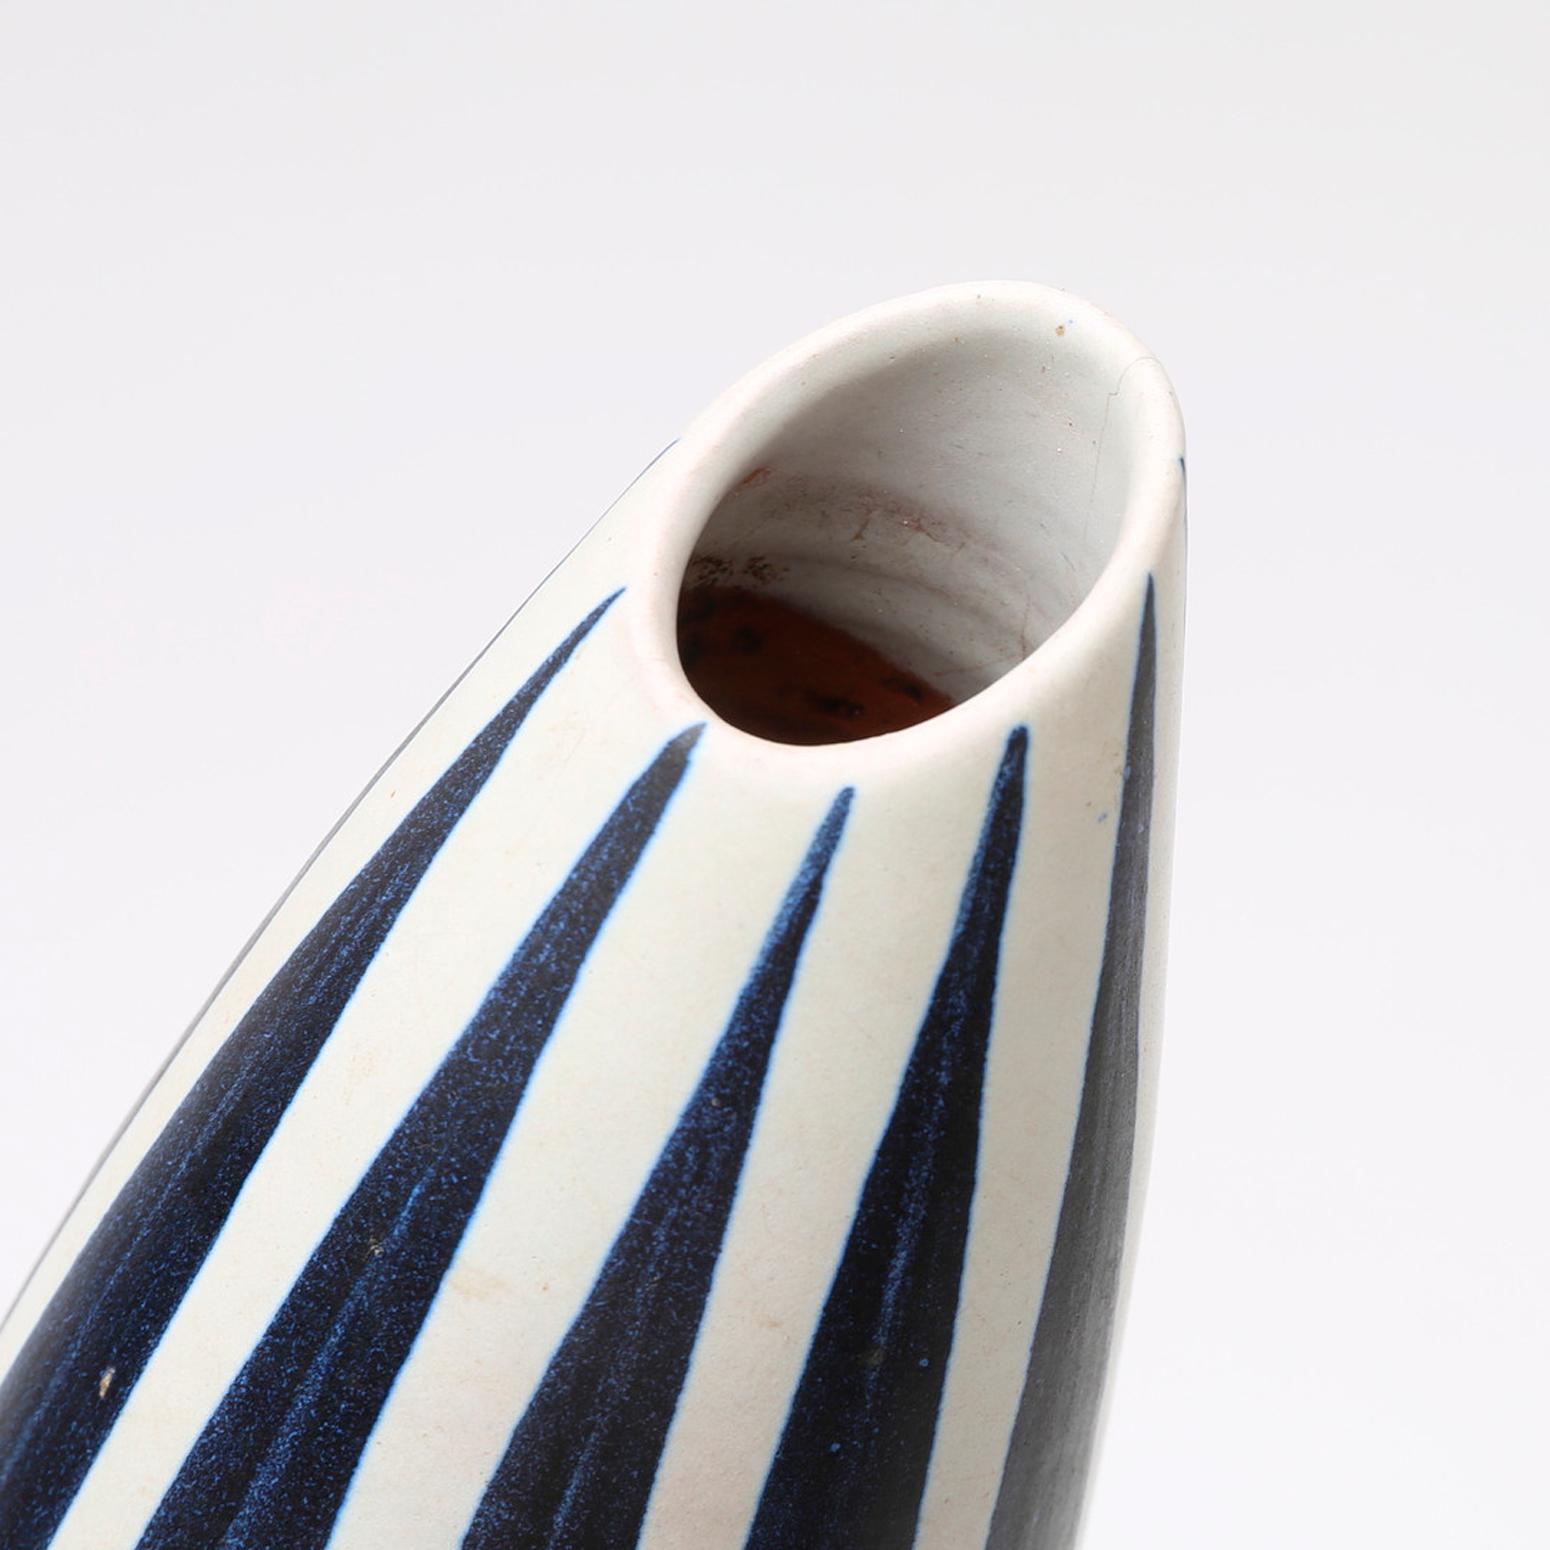 Hand-Crafted Pair of Scandinavian Modern Striped Vases by Mette Doller for Hoganas, 'Höganäs' For Sale